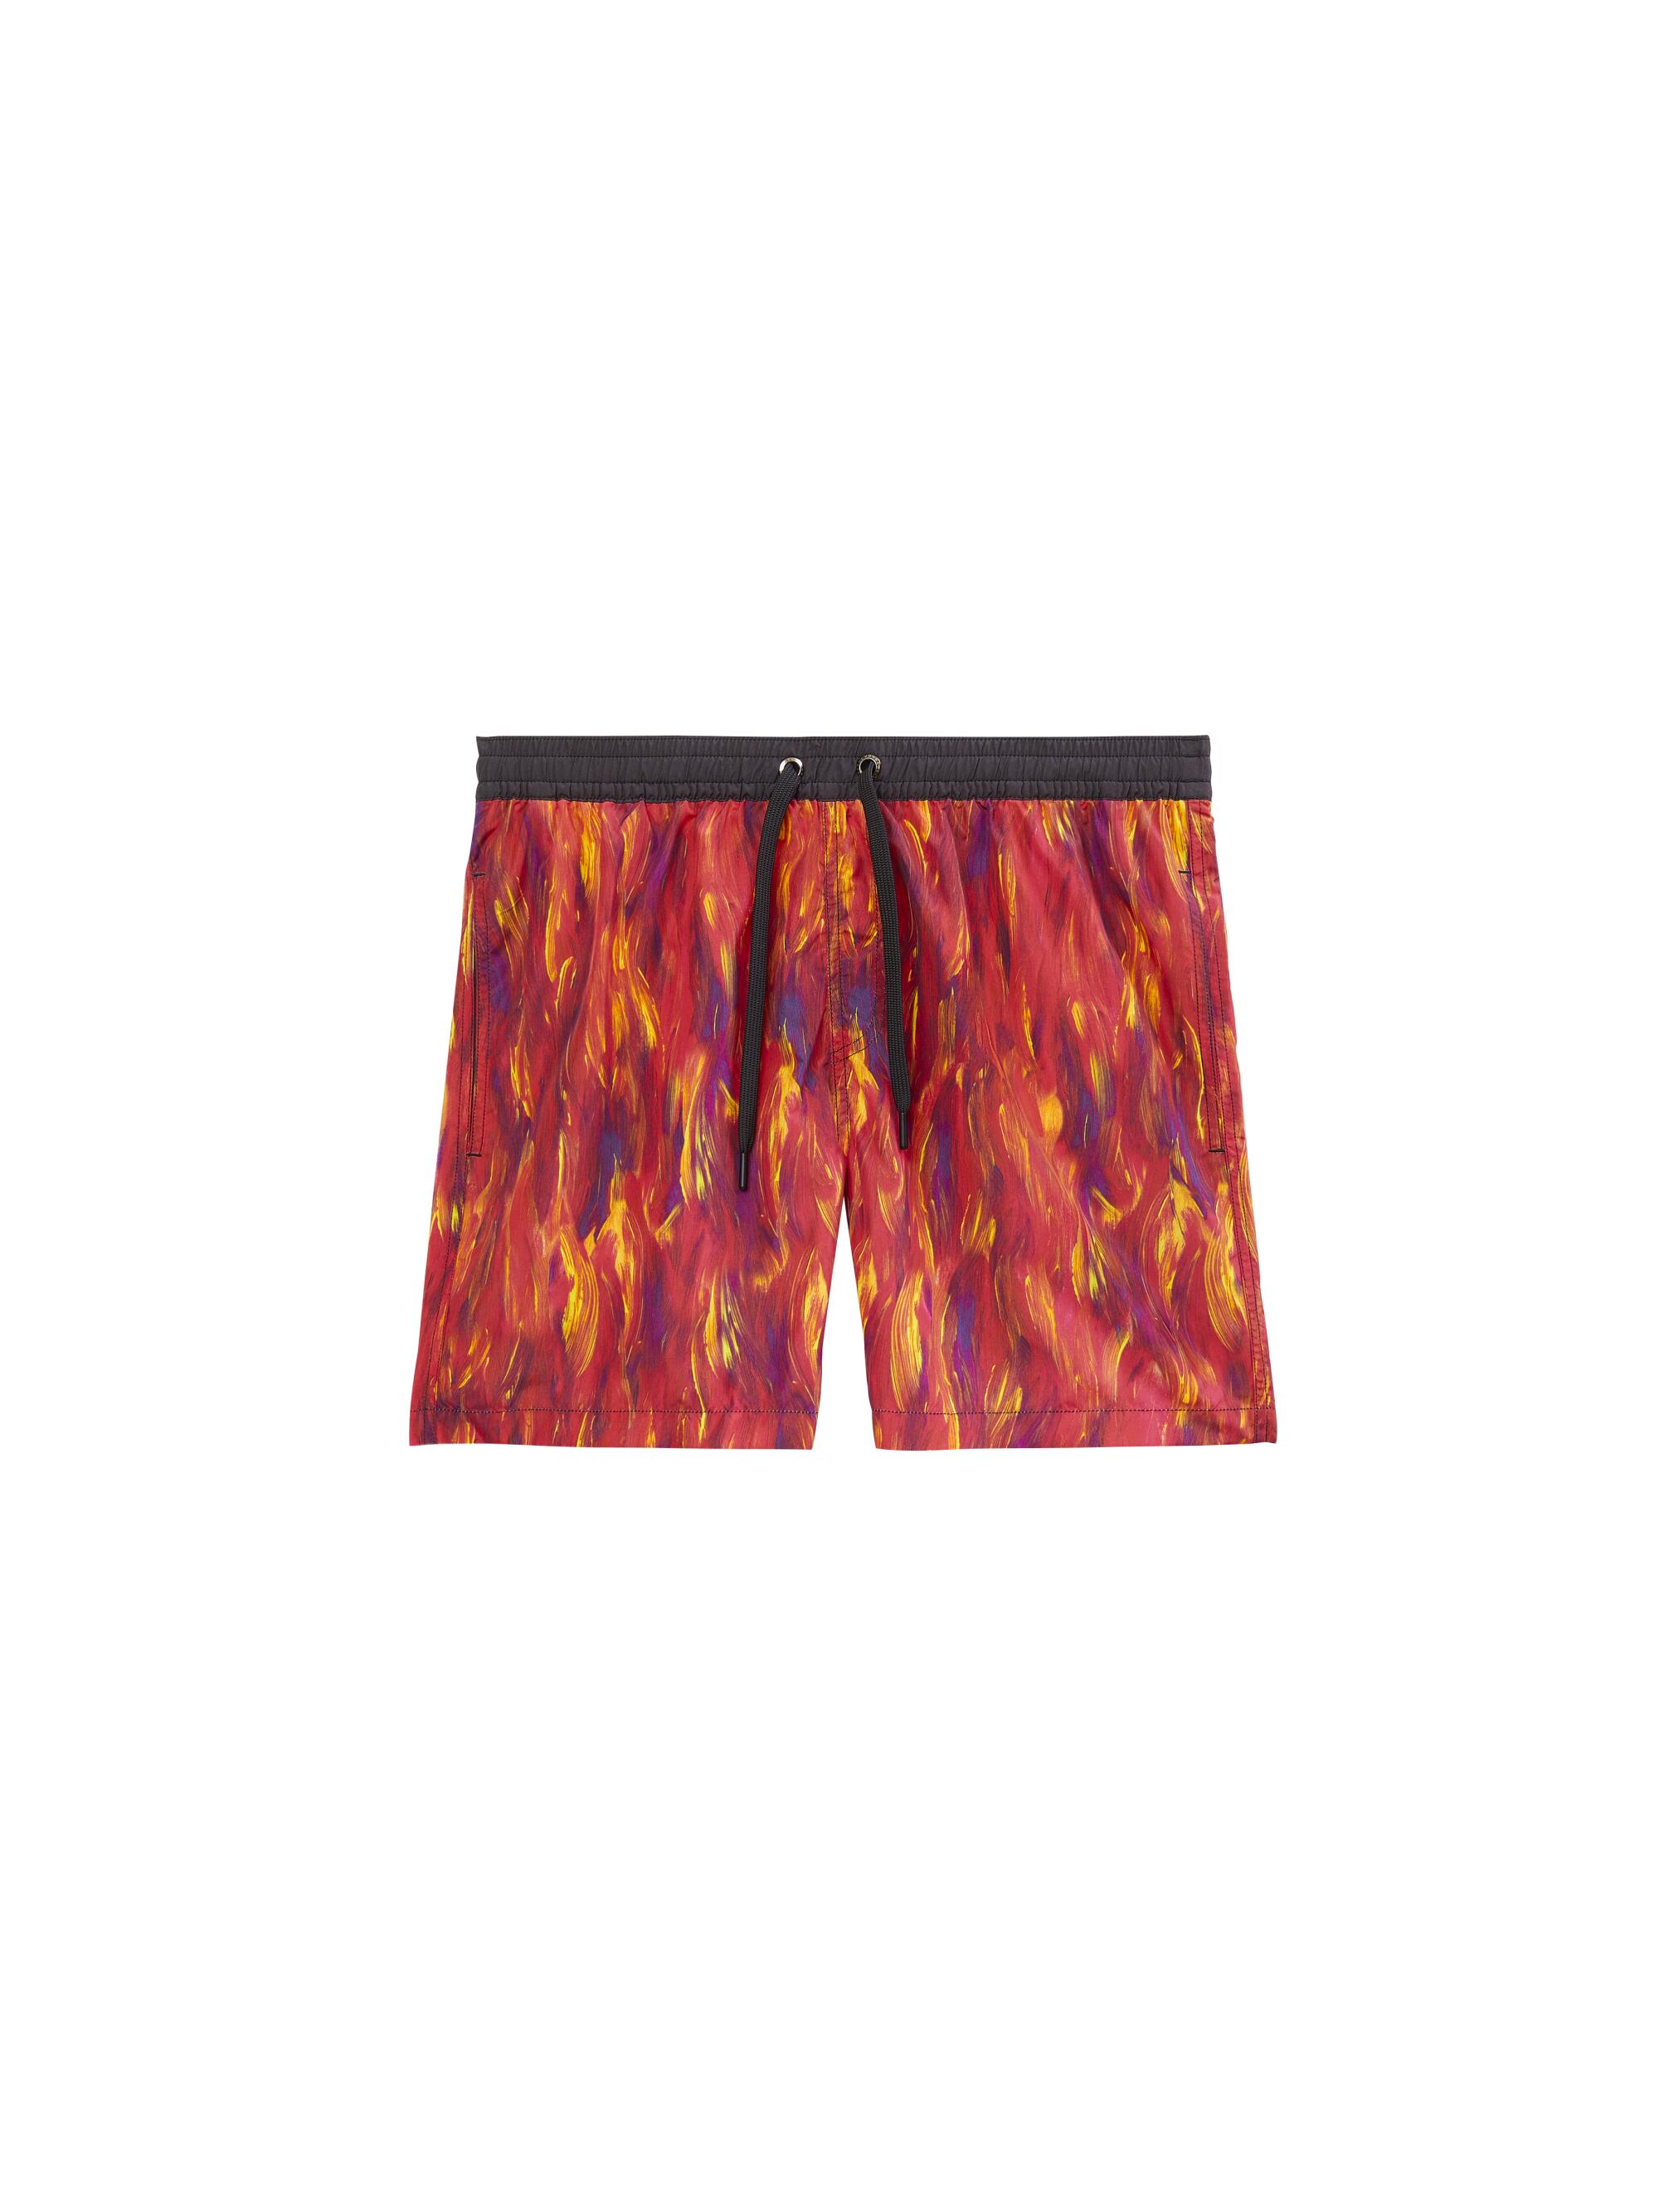 Swim trunks in an abstract fire print